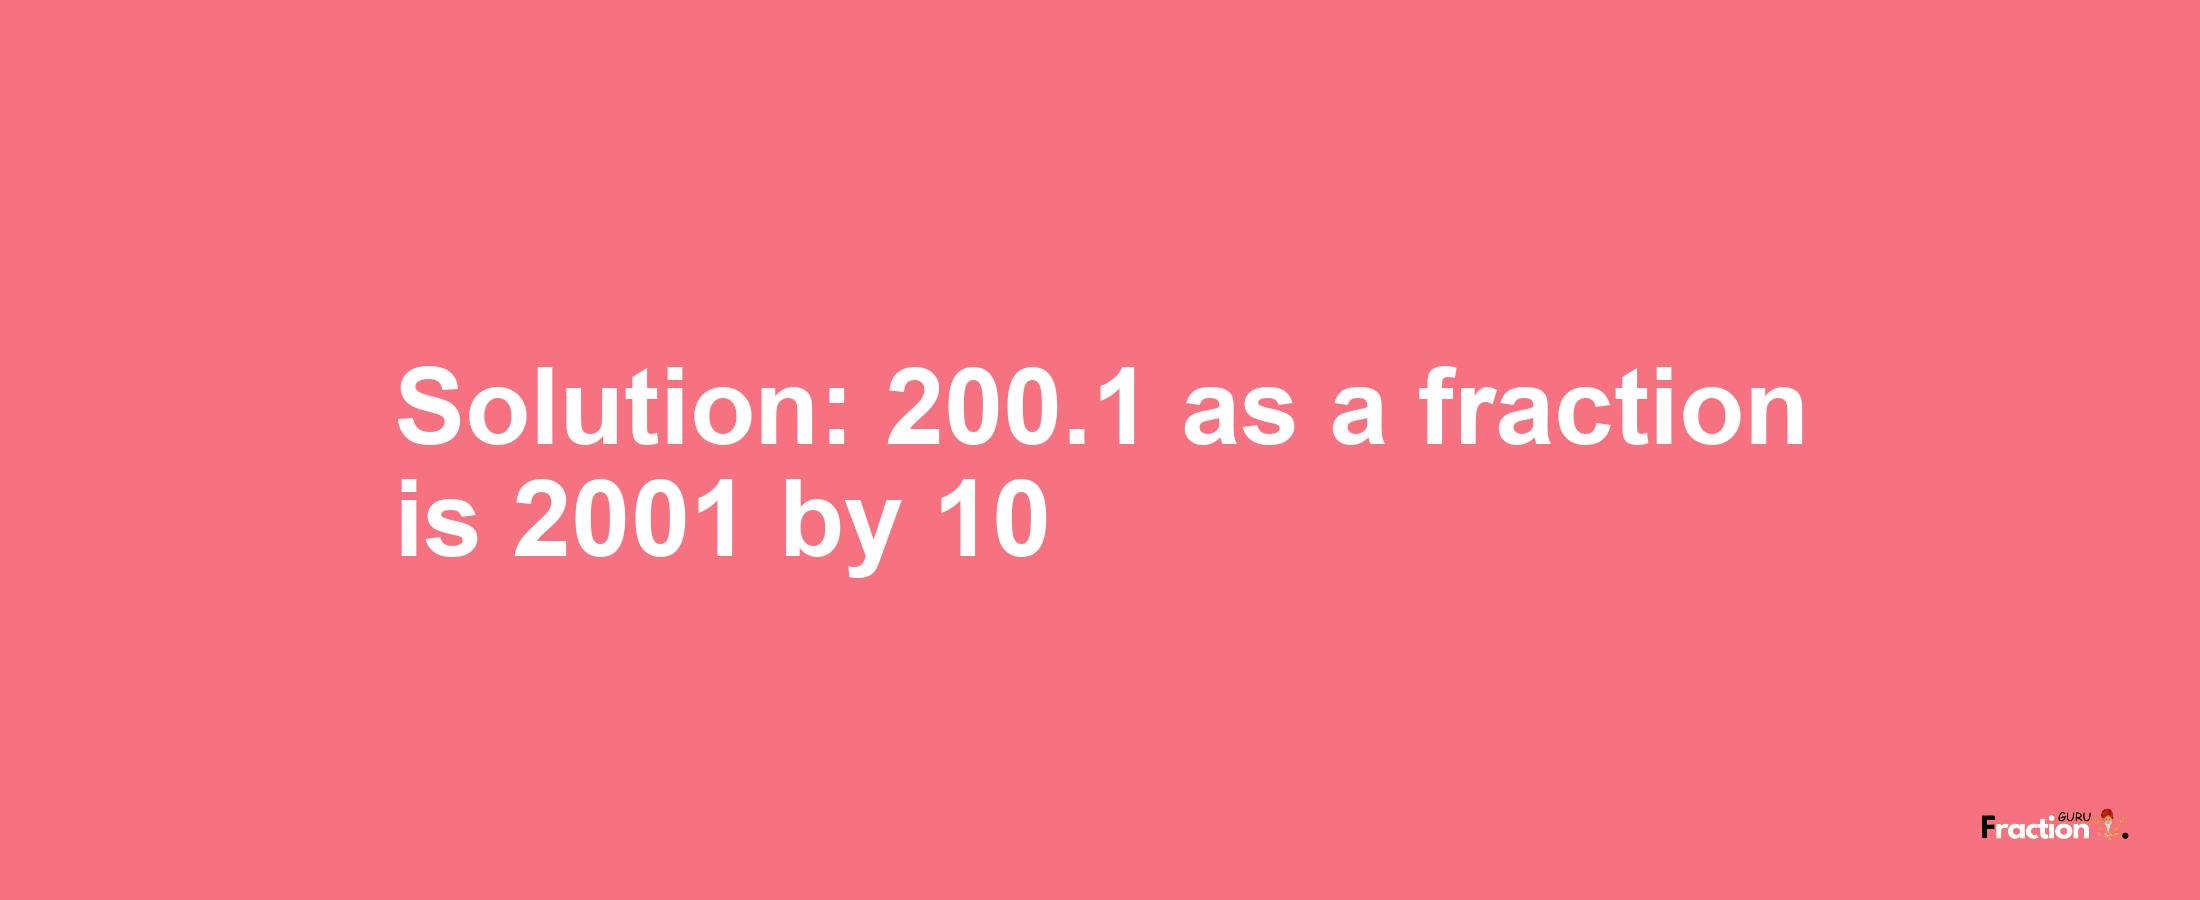 Solution:200.1 as a fraction is 2001/10